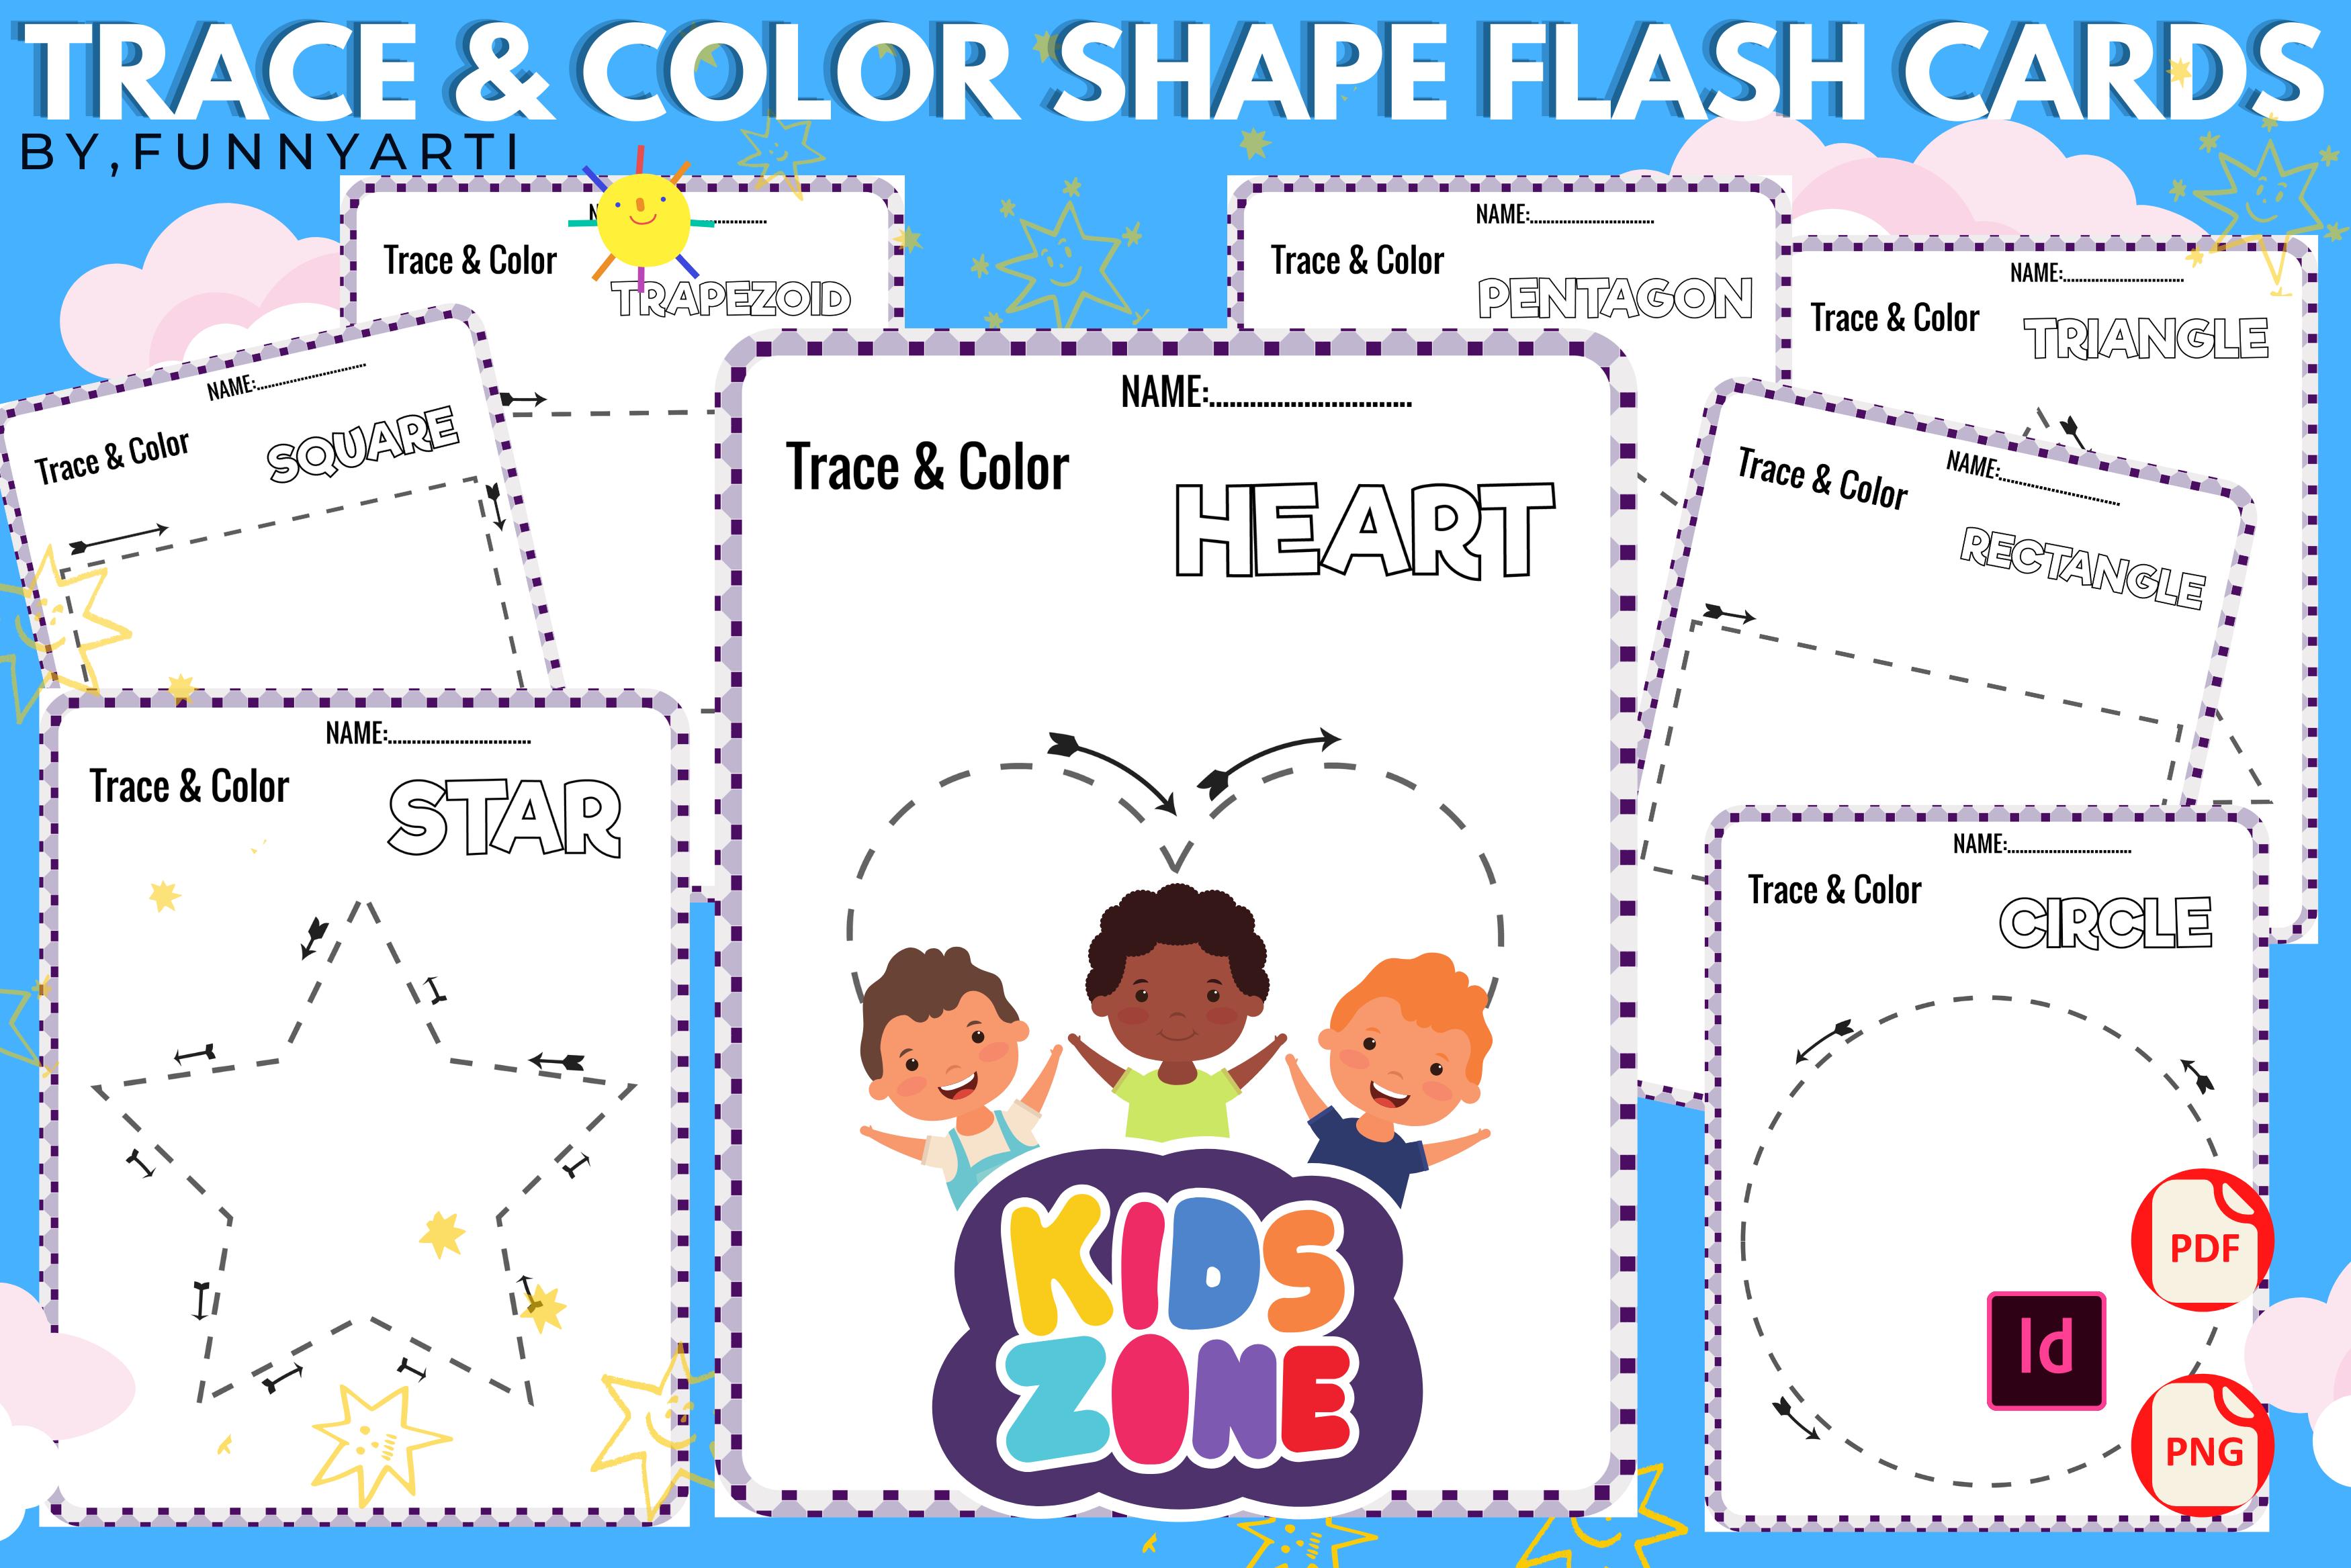 Trace & Color Shapes Flash Cards